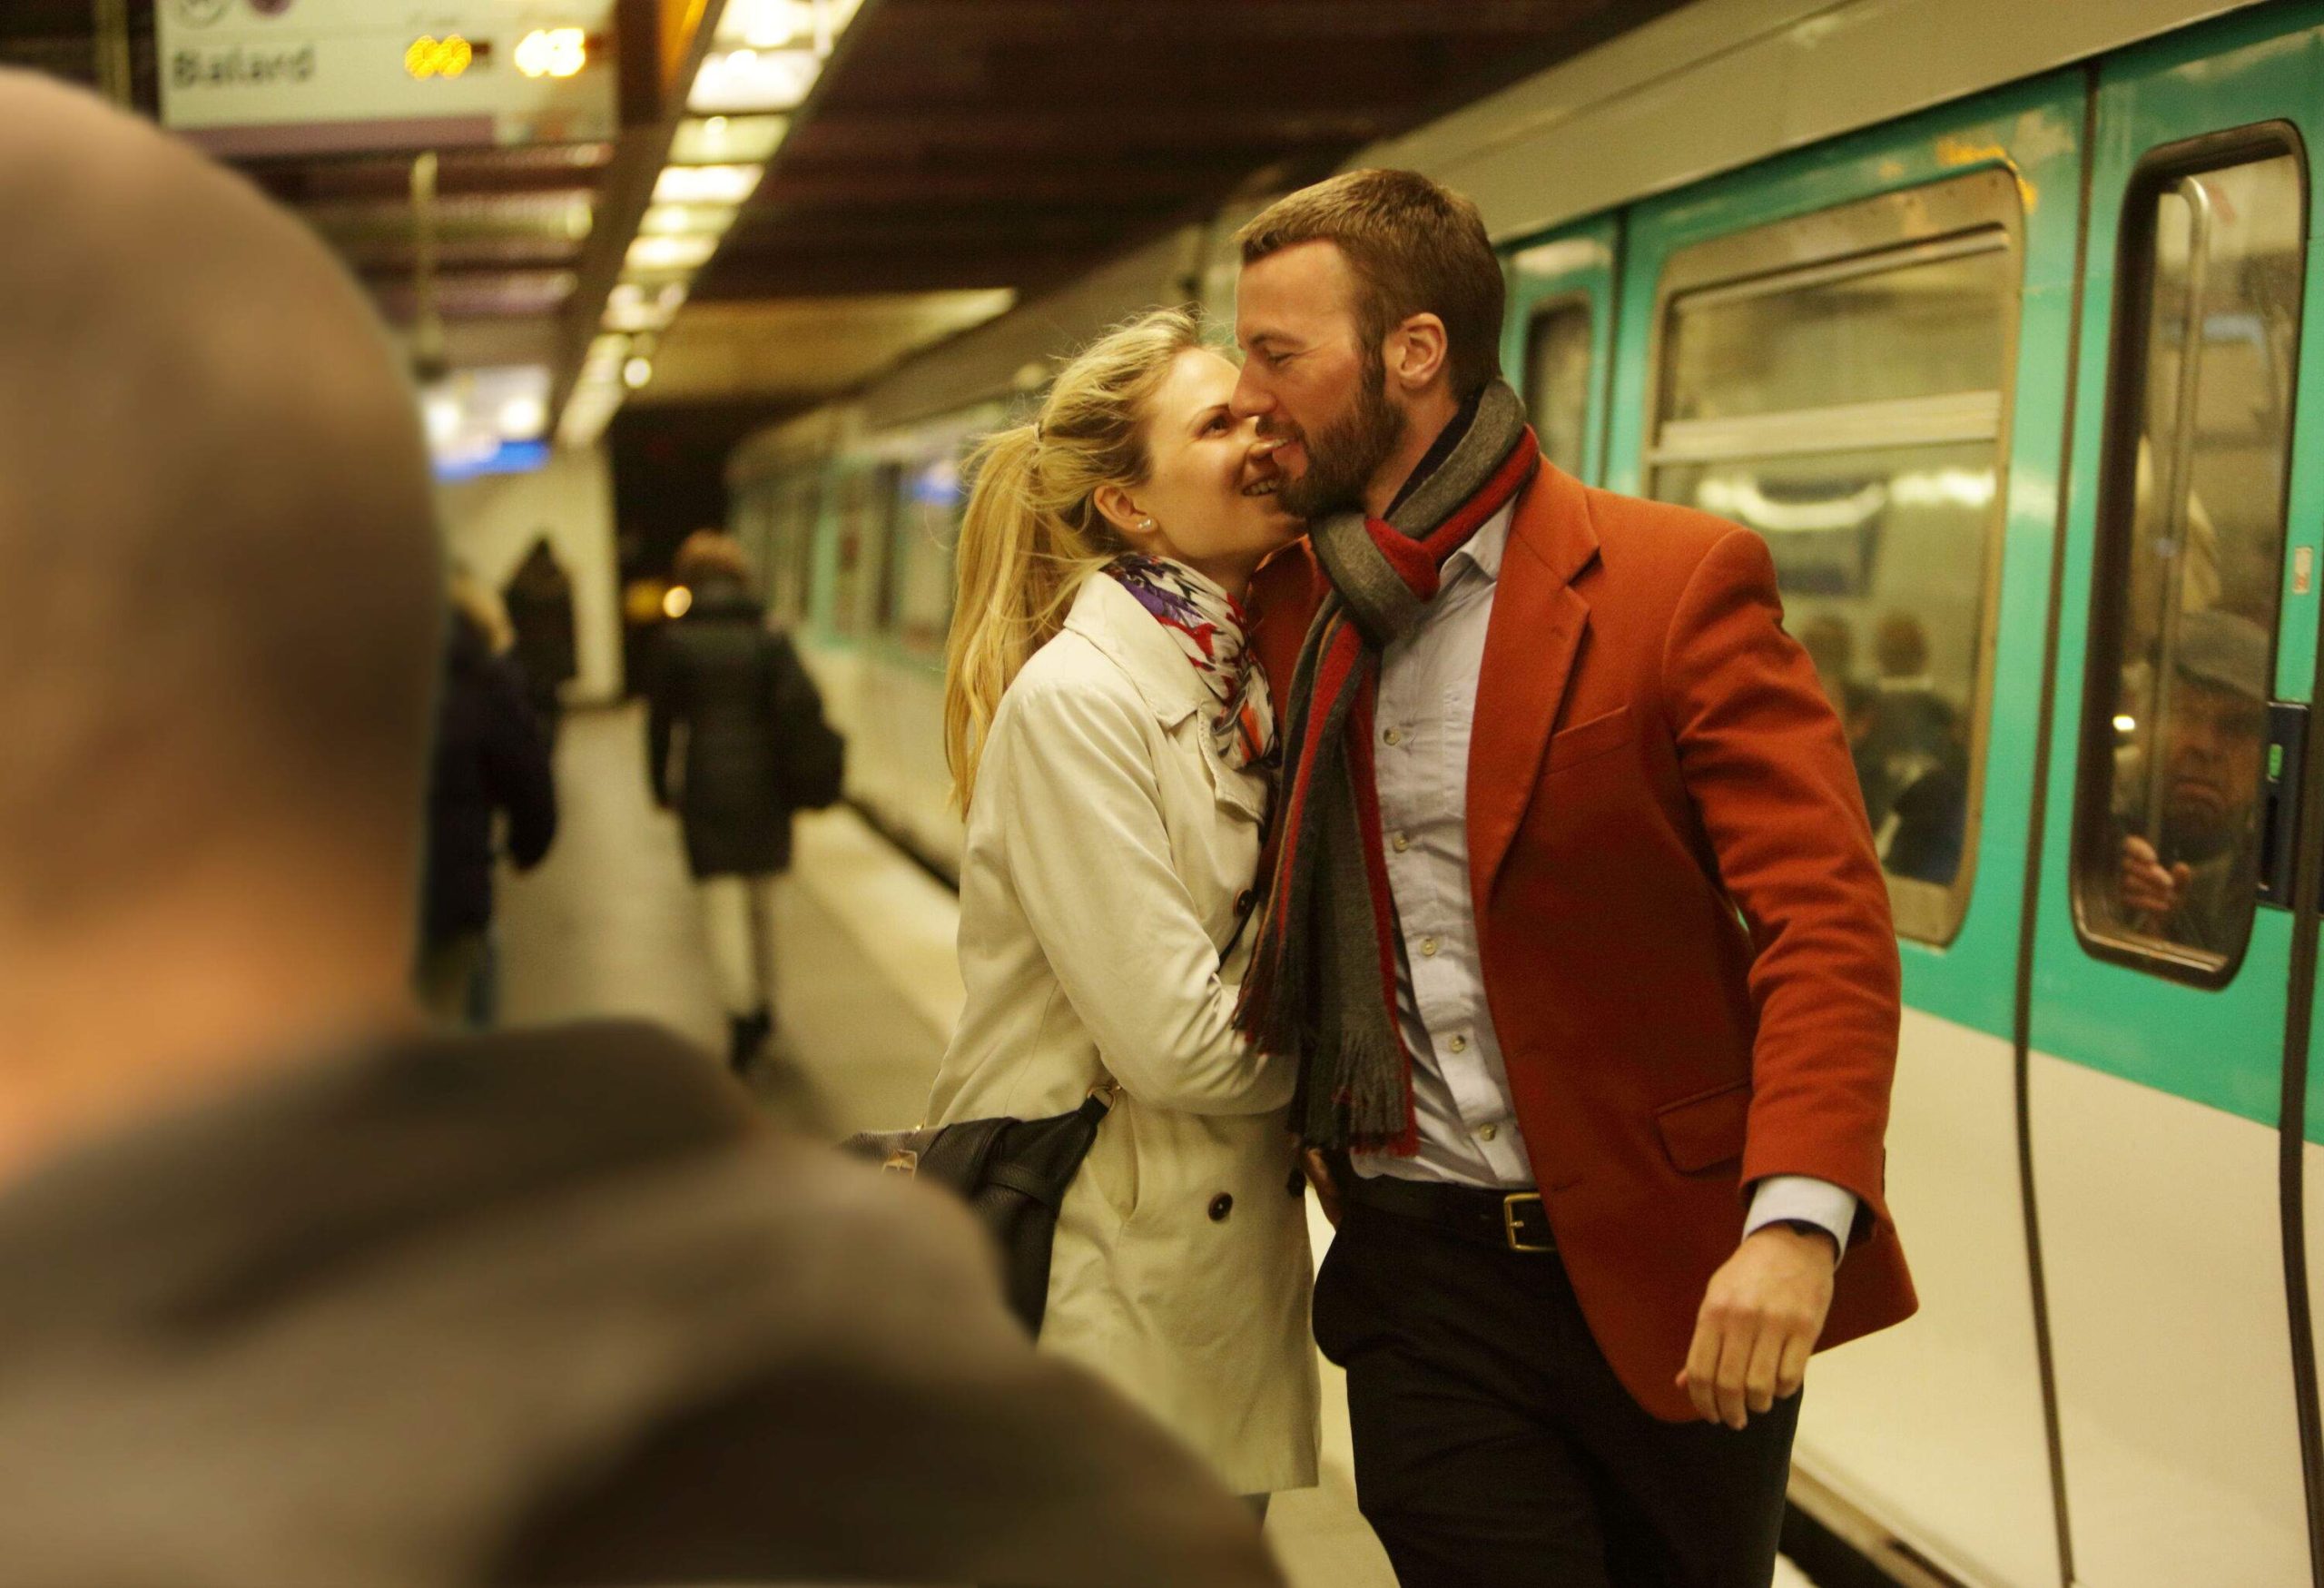 An affectionate couple standing next to a train at a metro station.